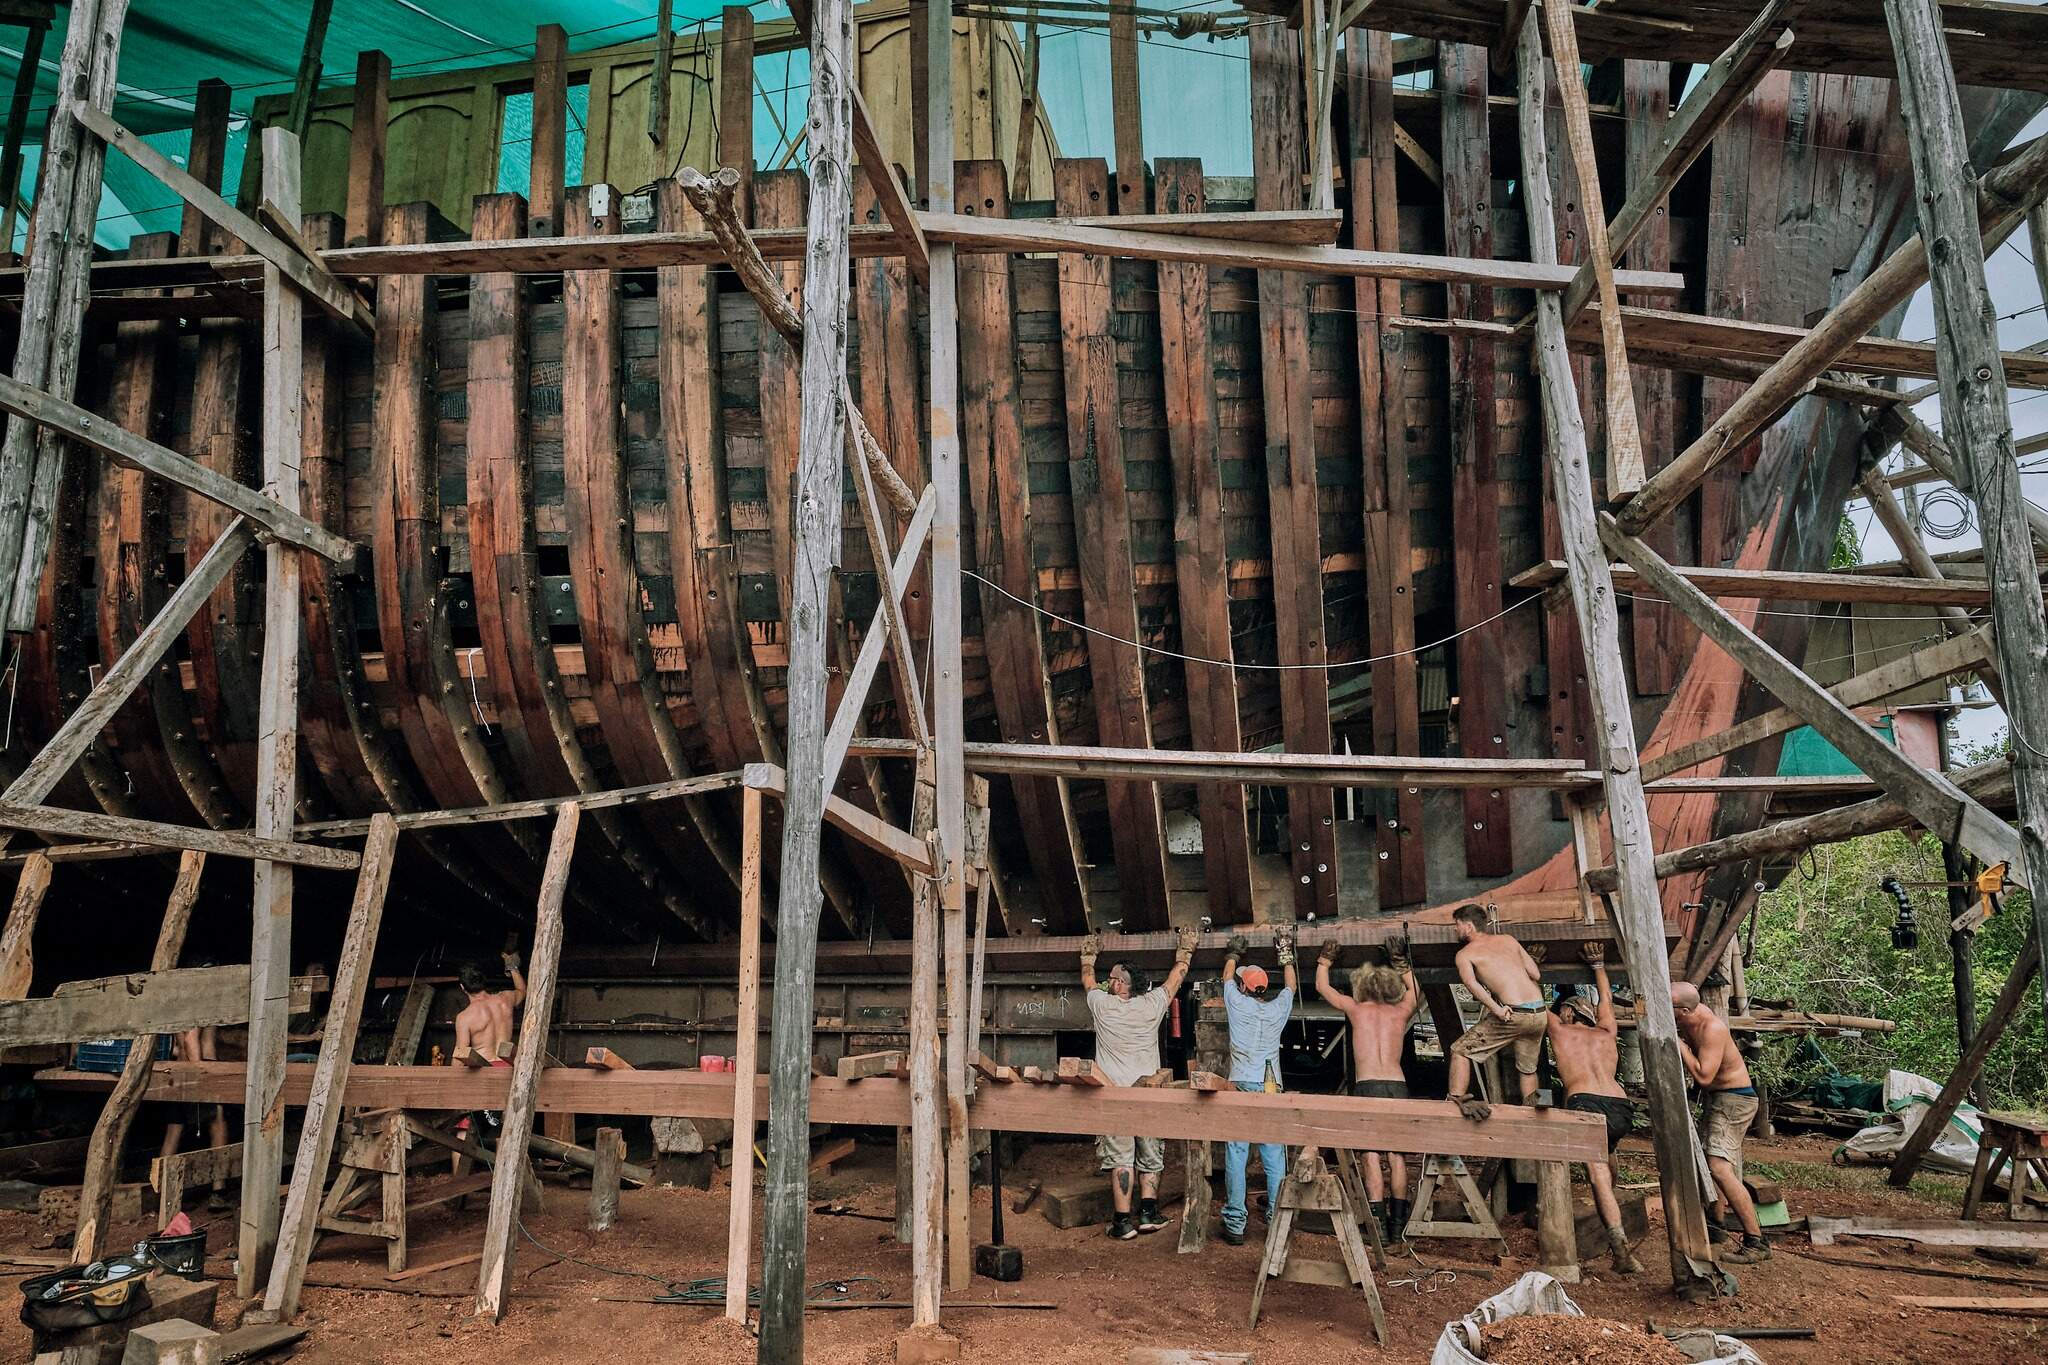 Workers building Sail Cargo’s wooden sailing vessel at a shipyard in Punta Morales, Costa Rica. (Courtesy of Sail Cargo)